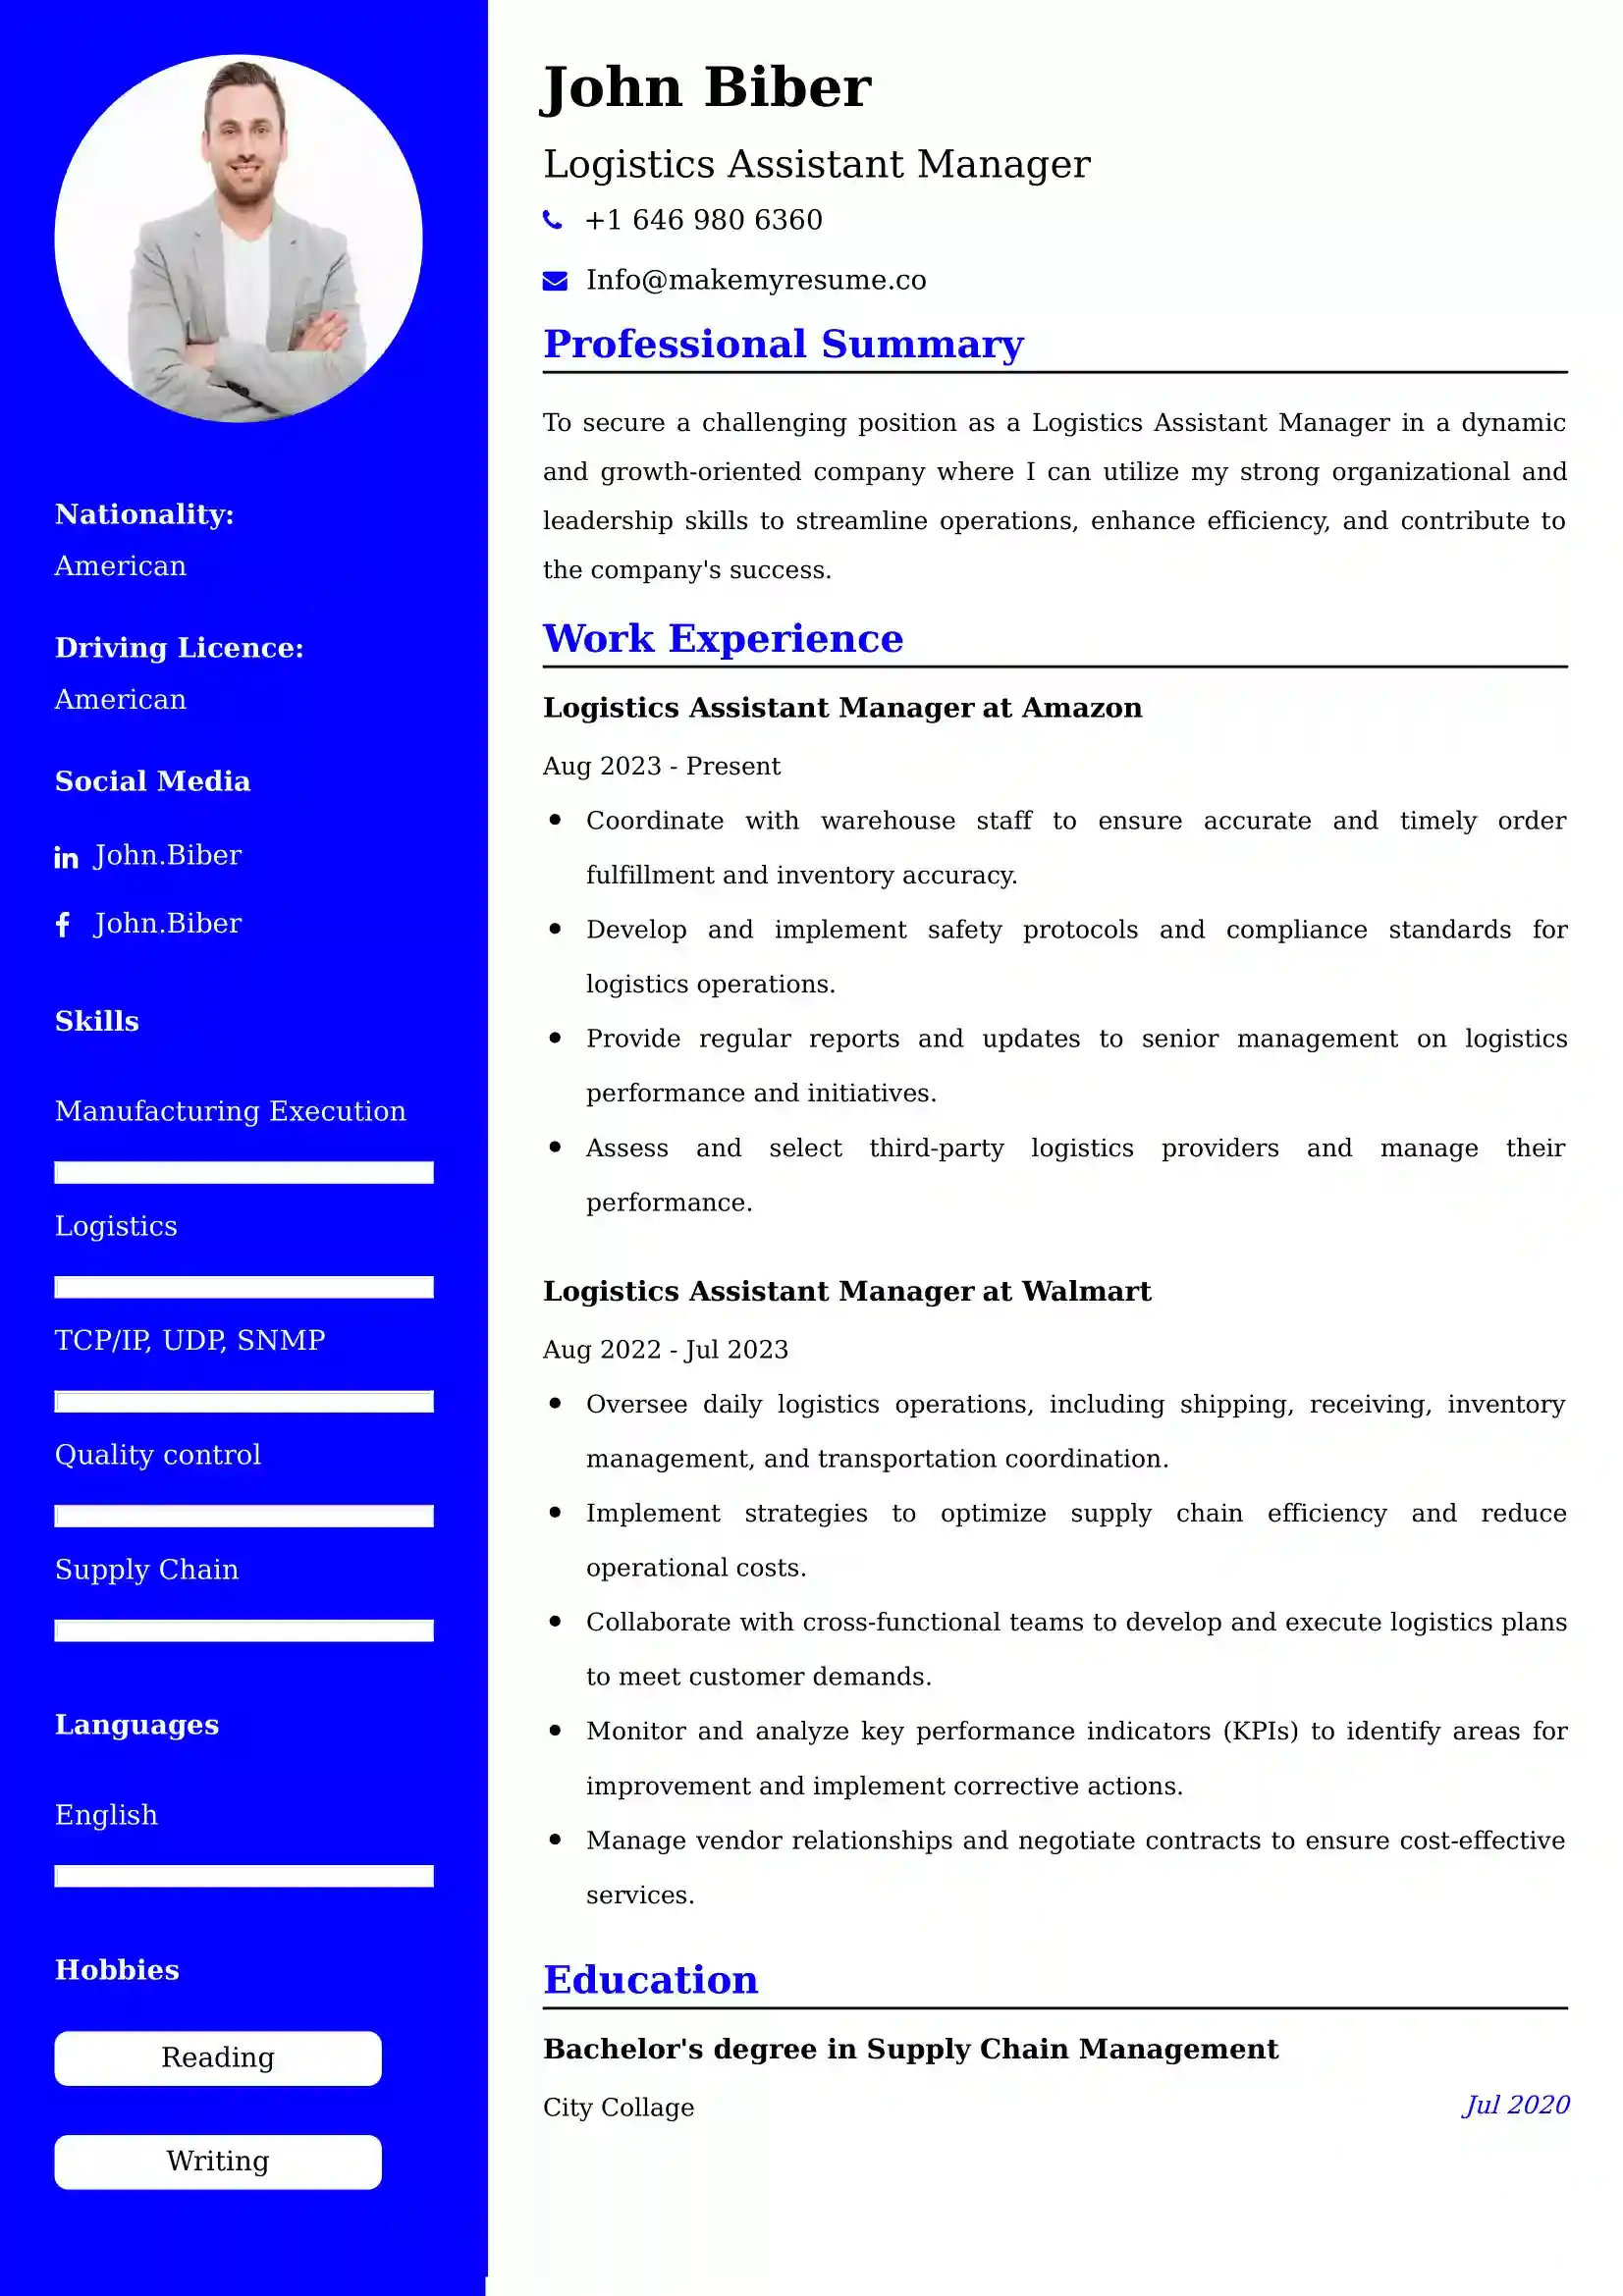 Best Logistics Assistant Manager Resume Examples for UK